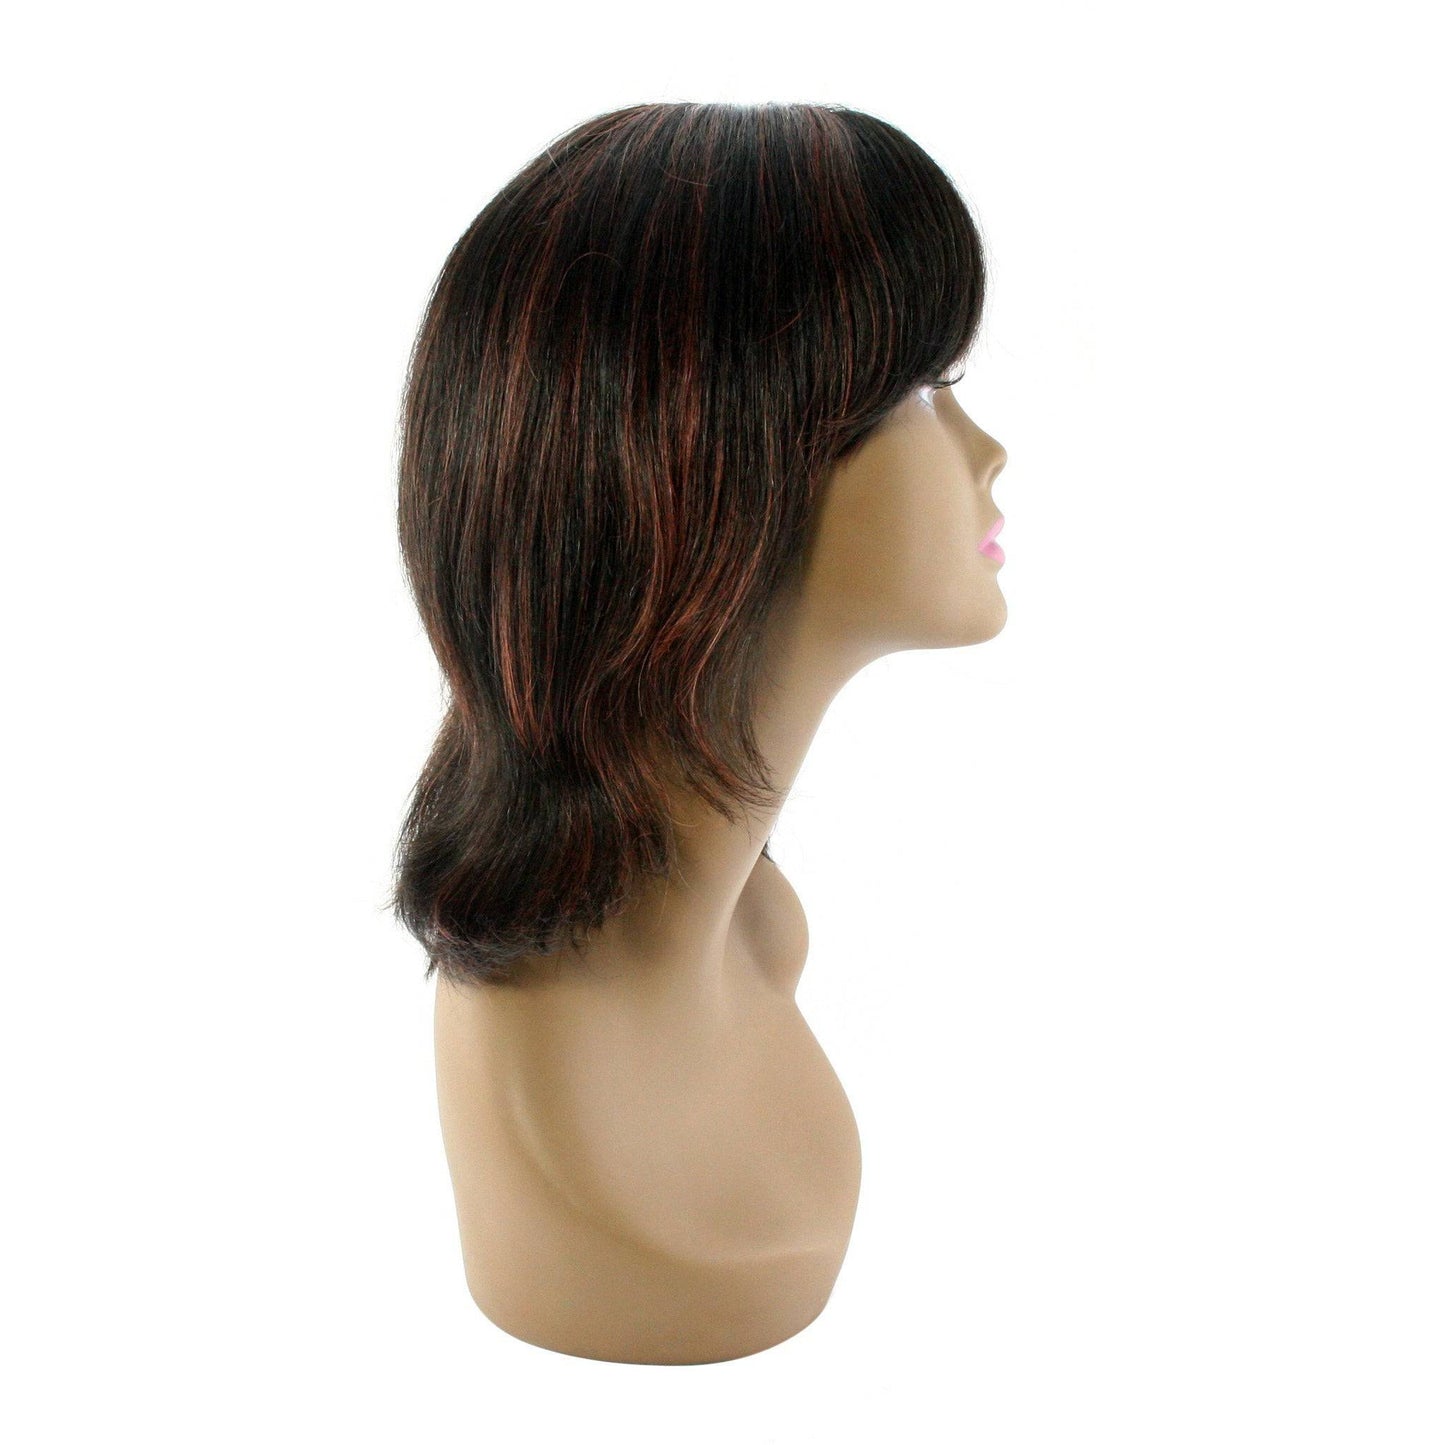 Unique's 100% Human Hair Full Wig / Style "X" - VIP Extensions